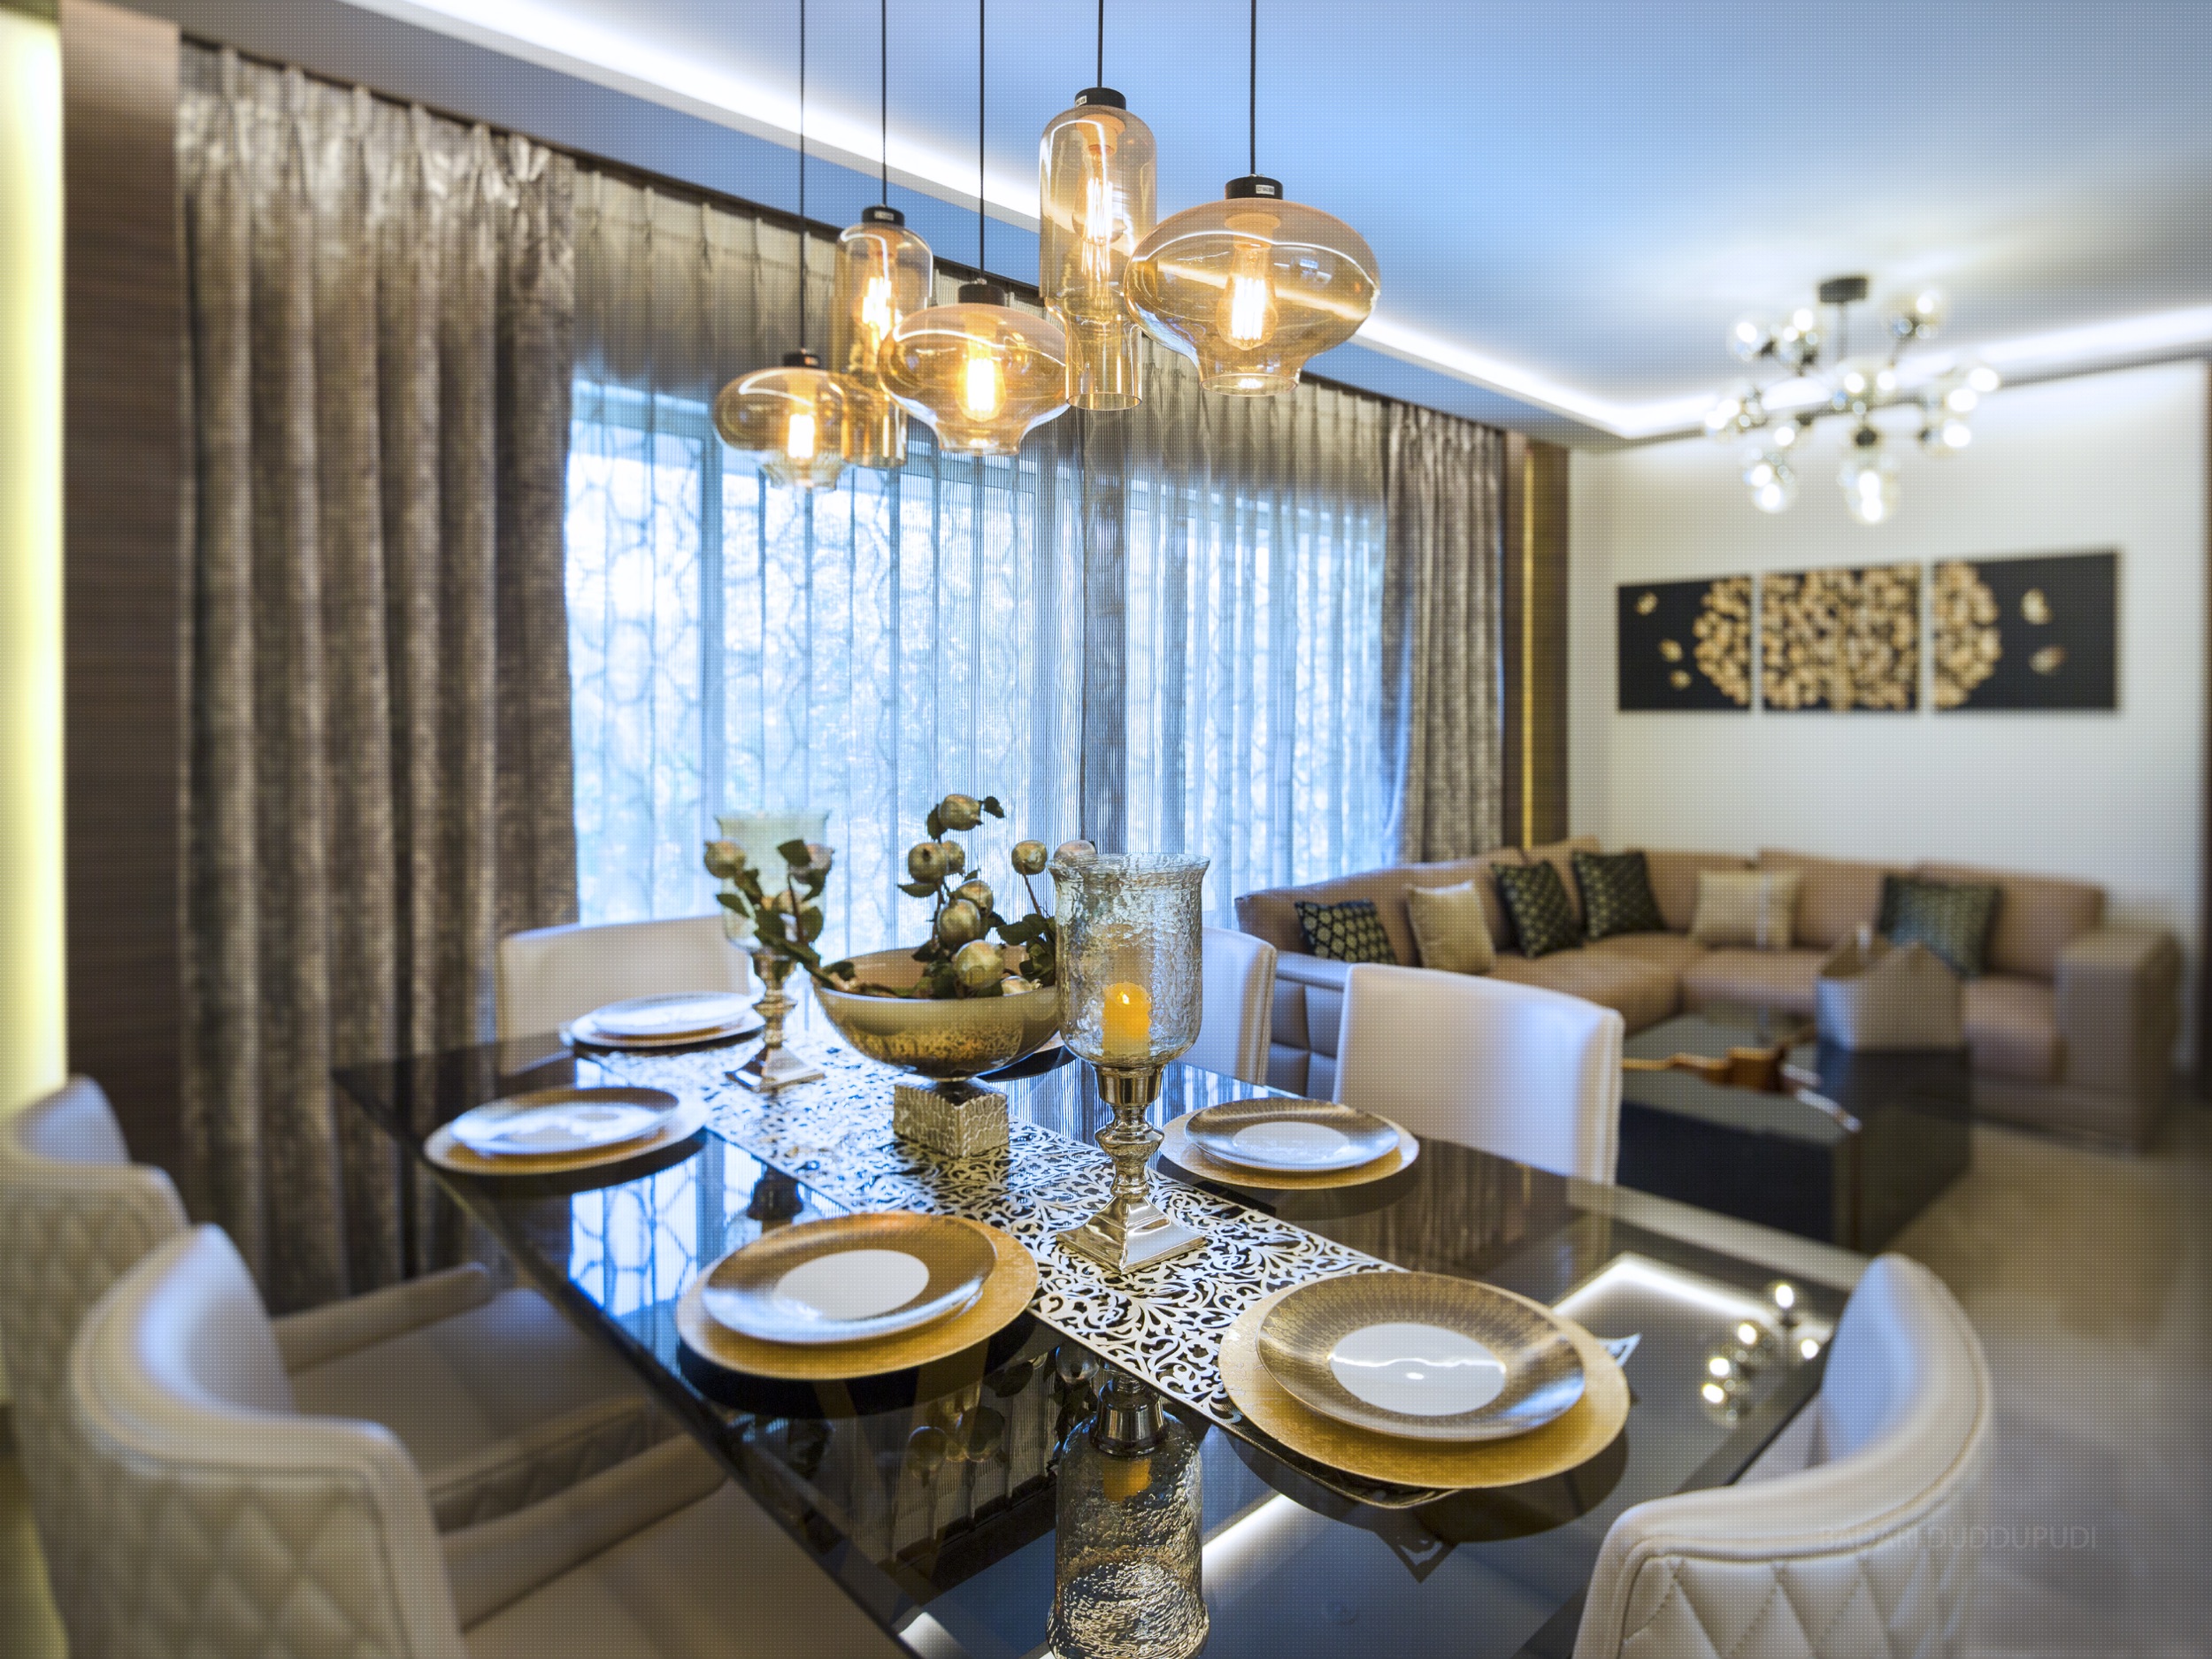 A residential project Living and Dining area in Borivali Mumbai